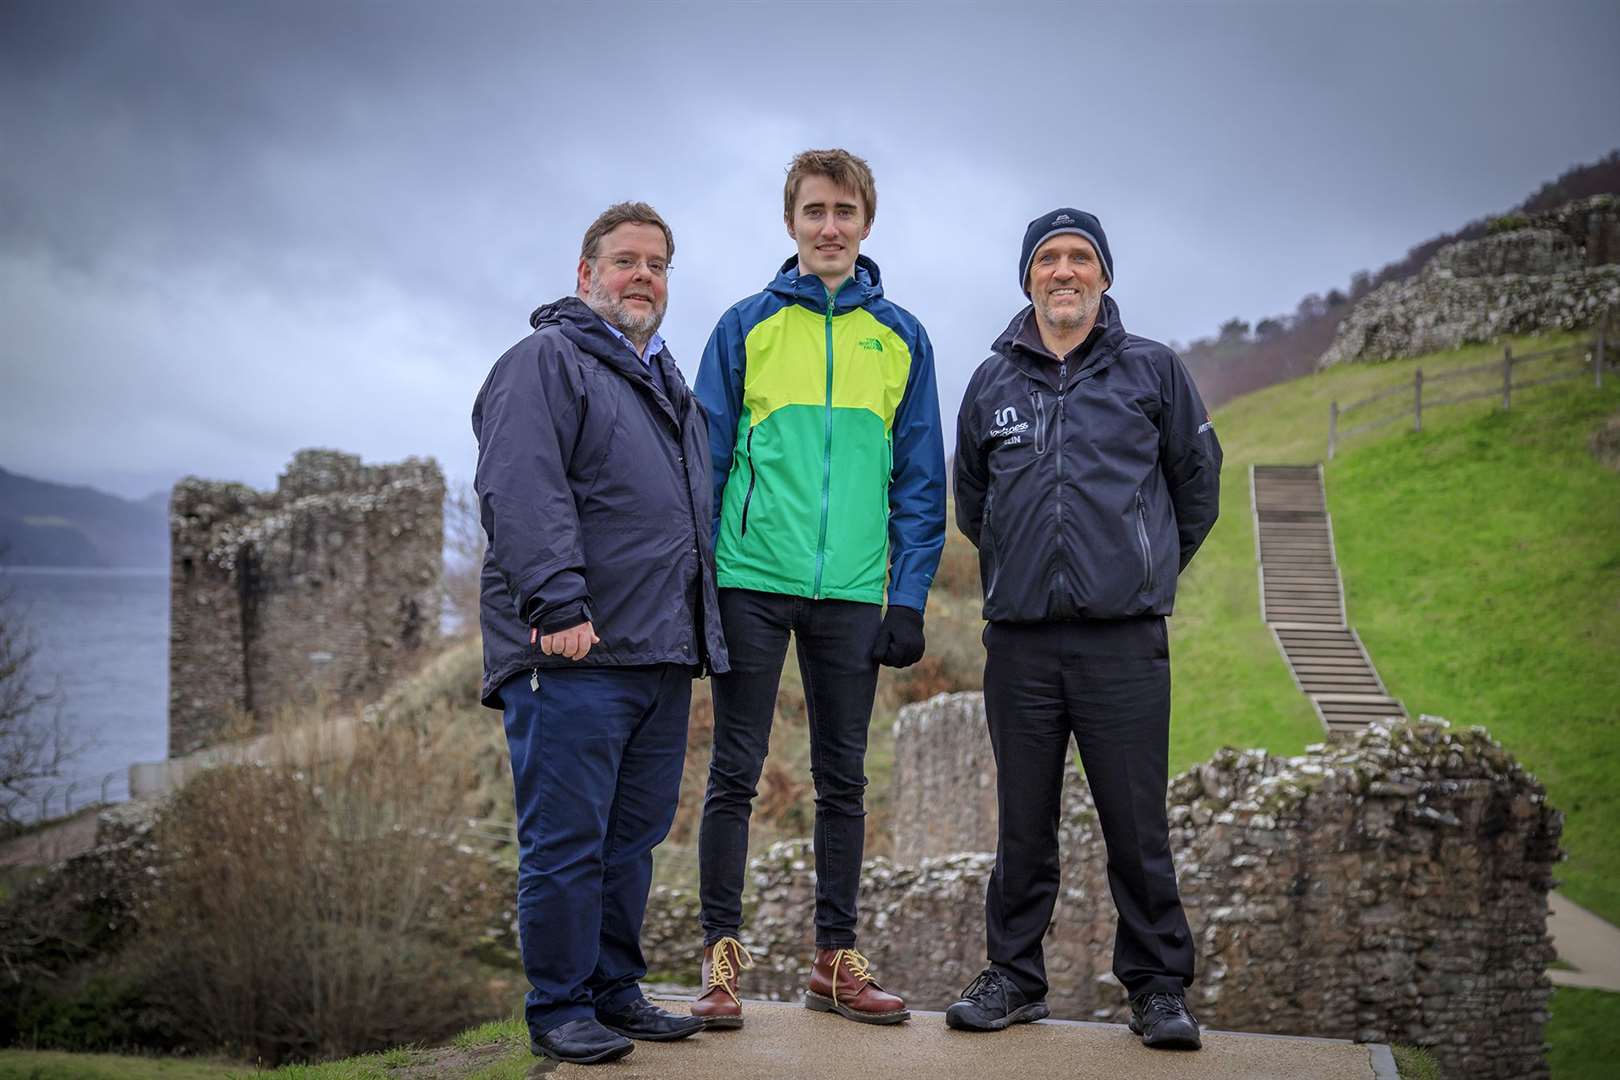 Euan Fraser, District Visitor and Community Manager (Urquhart Castle) at Historic Environment Scotland; Calum Smith, Social Enterprise and Events Lead at Àban Outdoor; and Colin Barber, Operations Manager at Loch Ness by Jacobite. Picture: Eoghan Smith